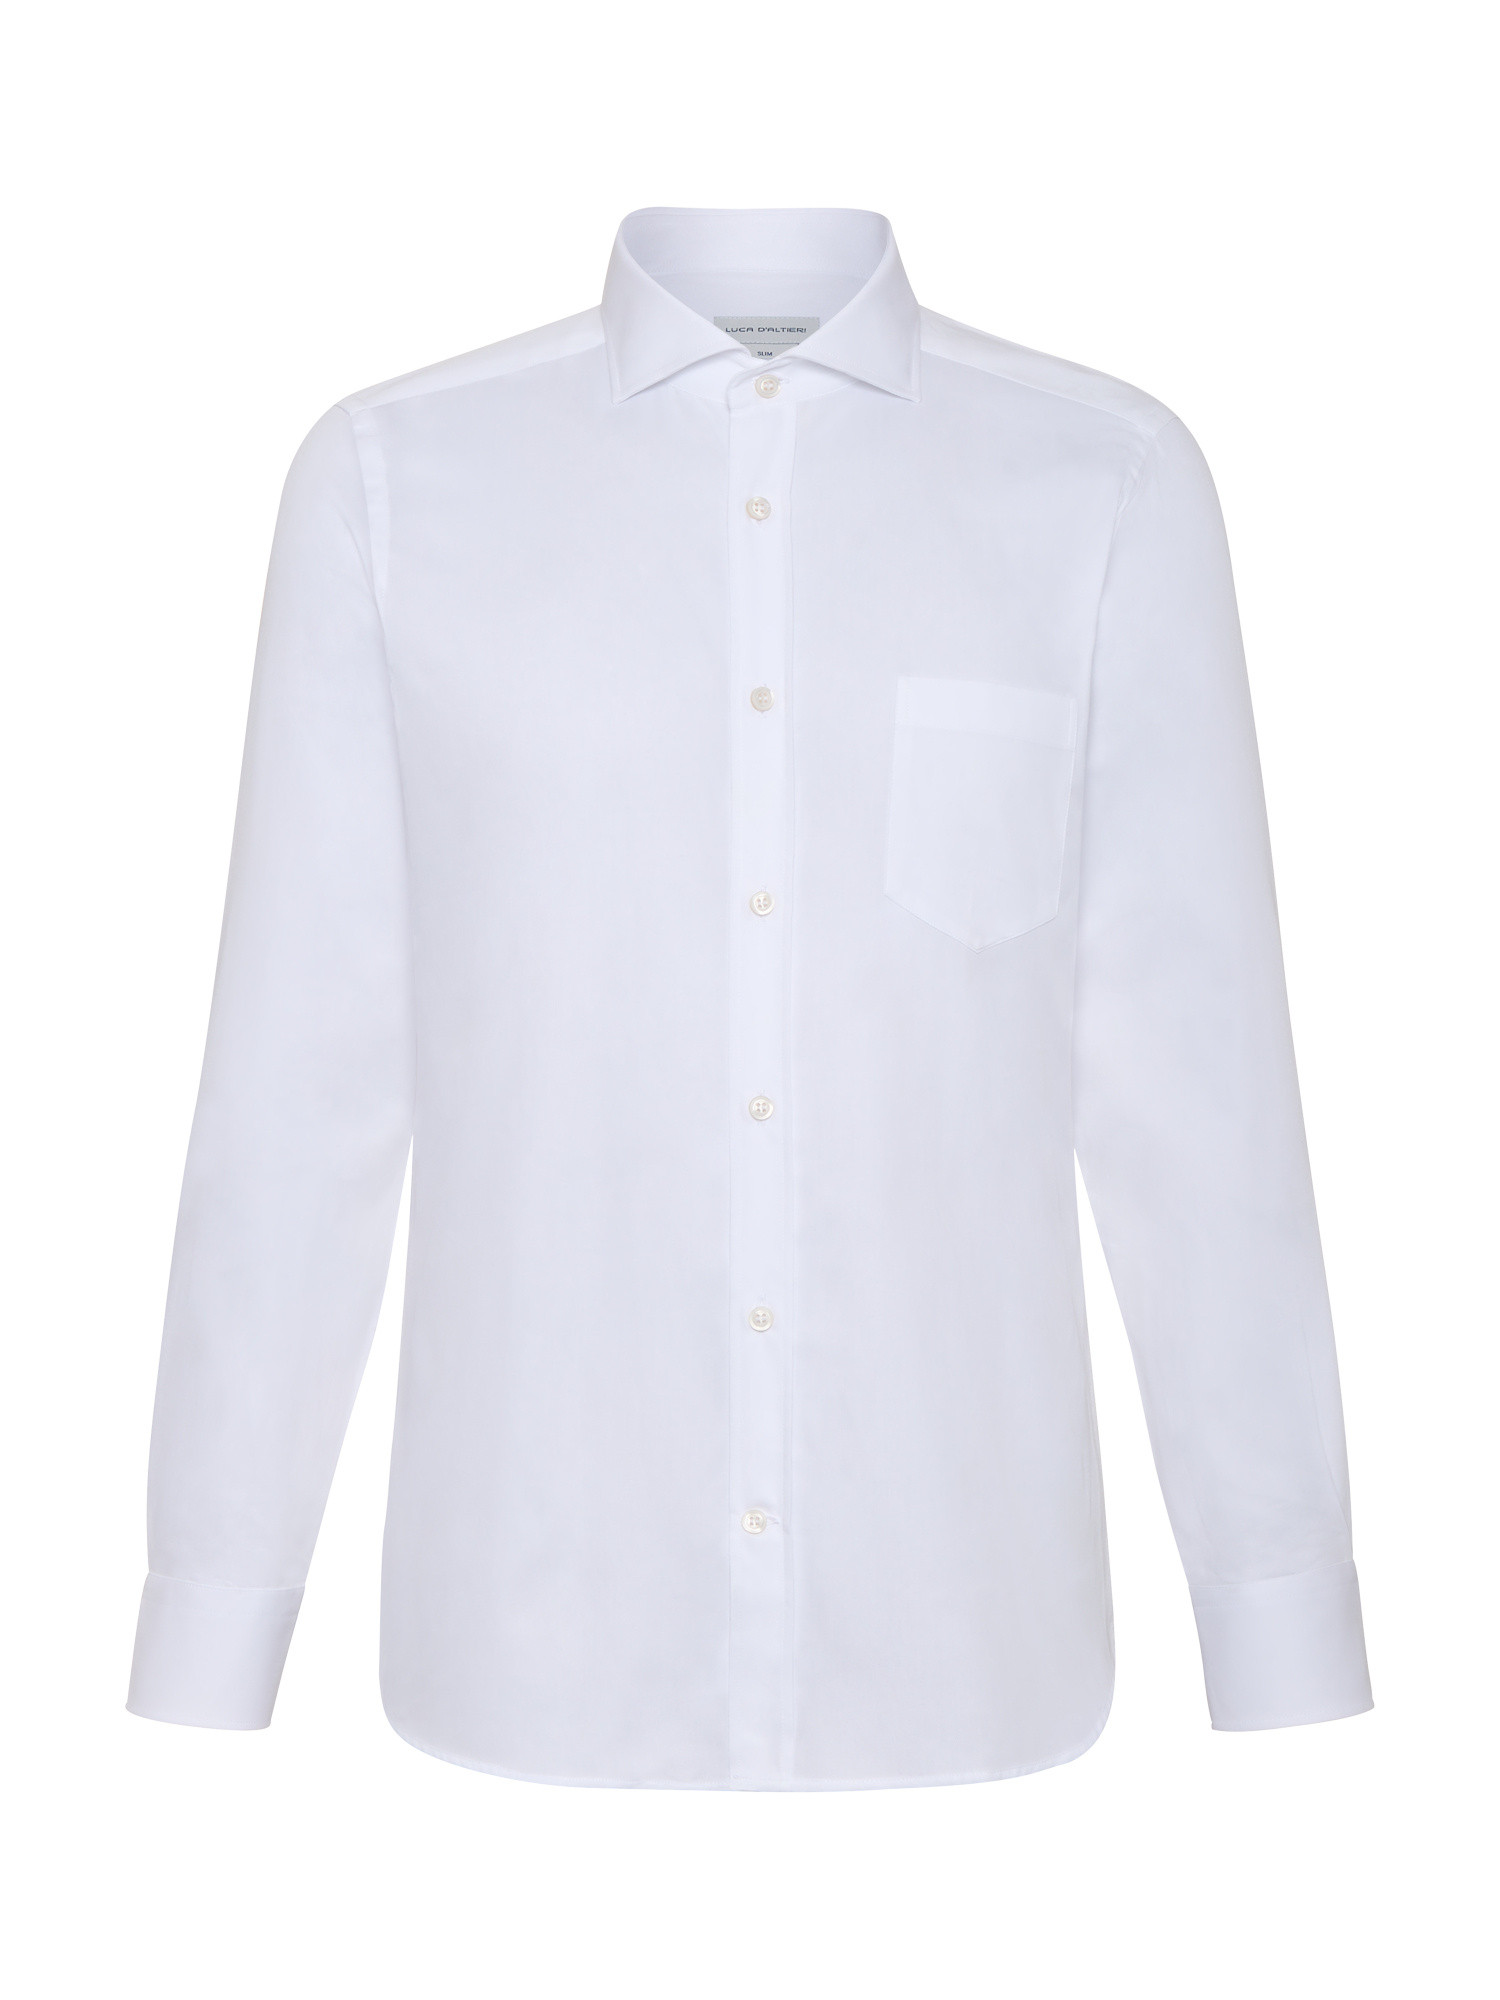 Luca D'Altieri - Casual slim fit shirt in pure cotton twill, White, large image number 1